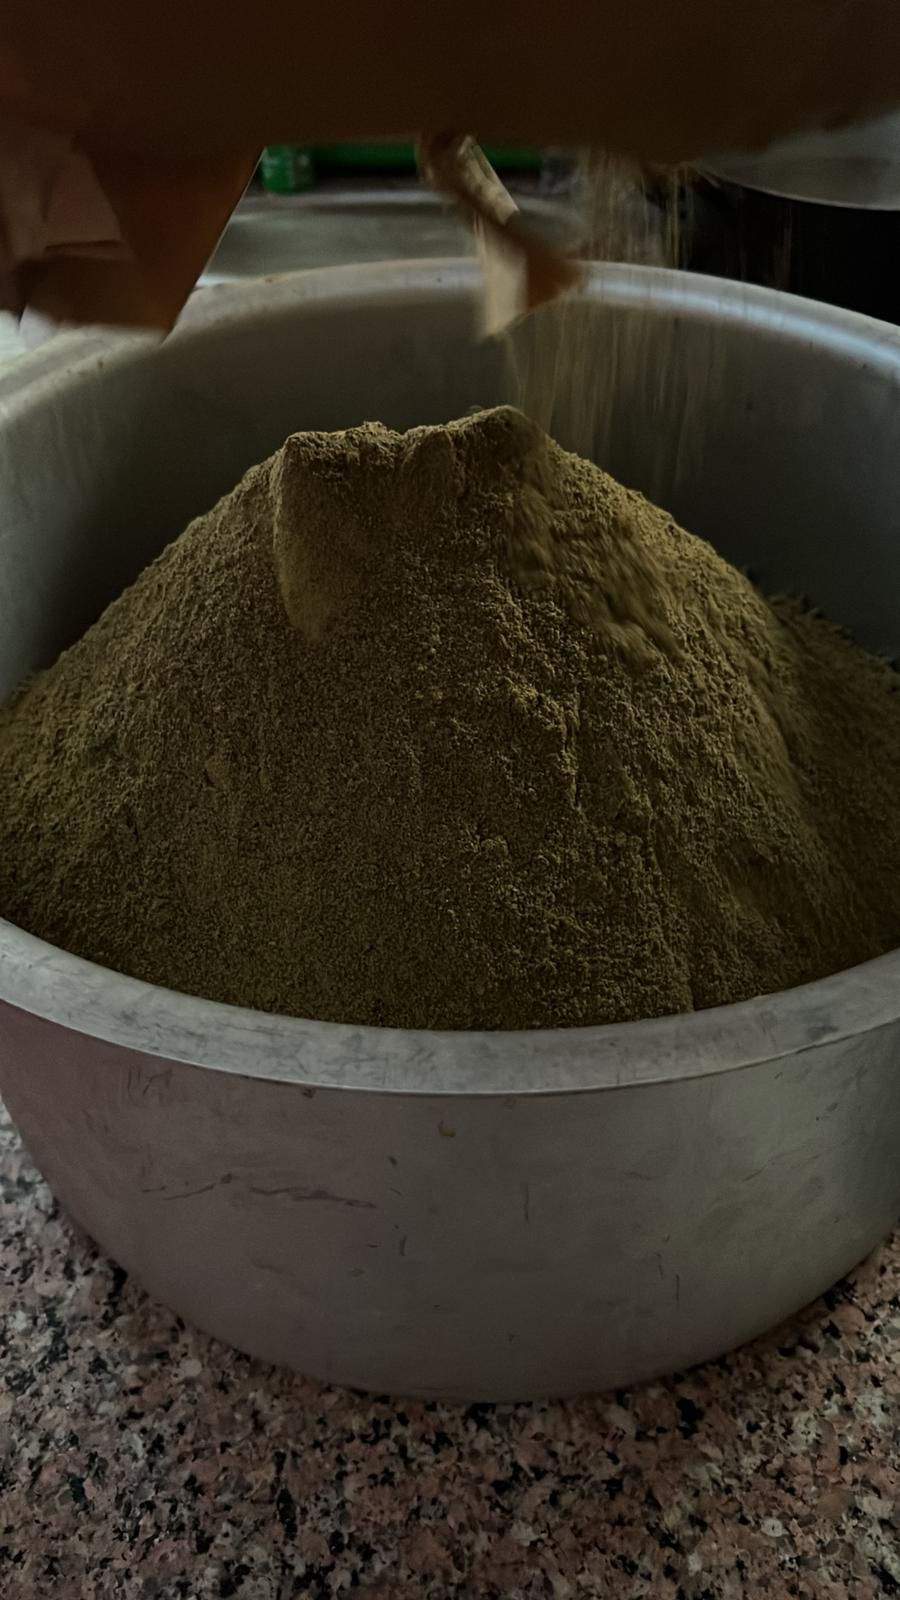 Hemp flour piled very high, brown green color with front of large bowl edge.